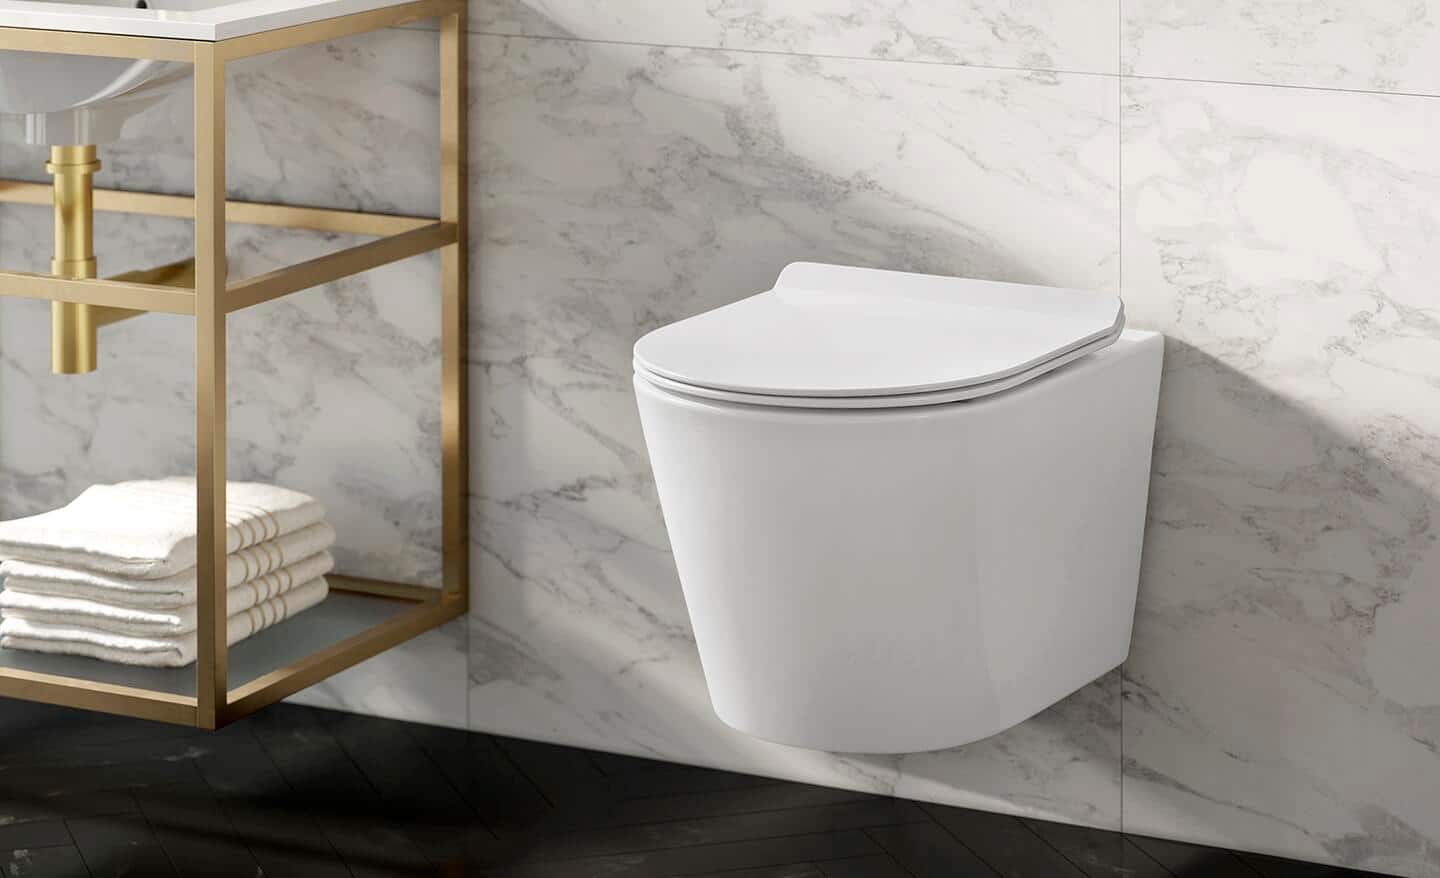 A wall-hung toilet installed in a marble bath.